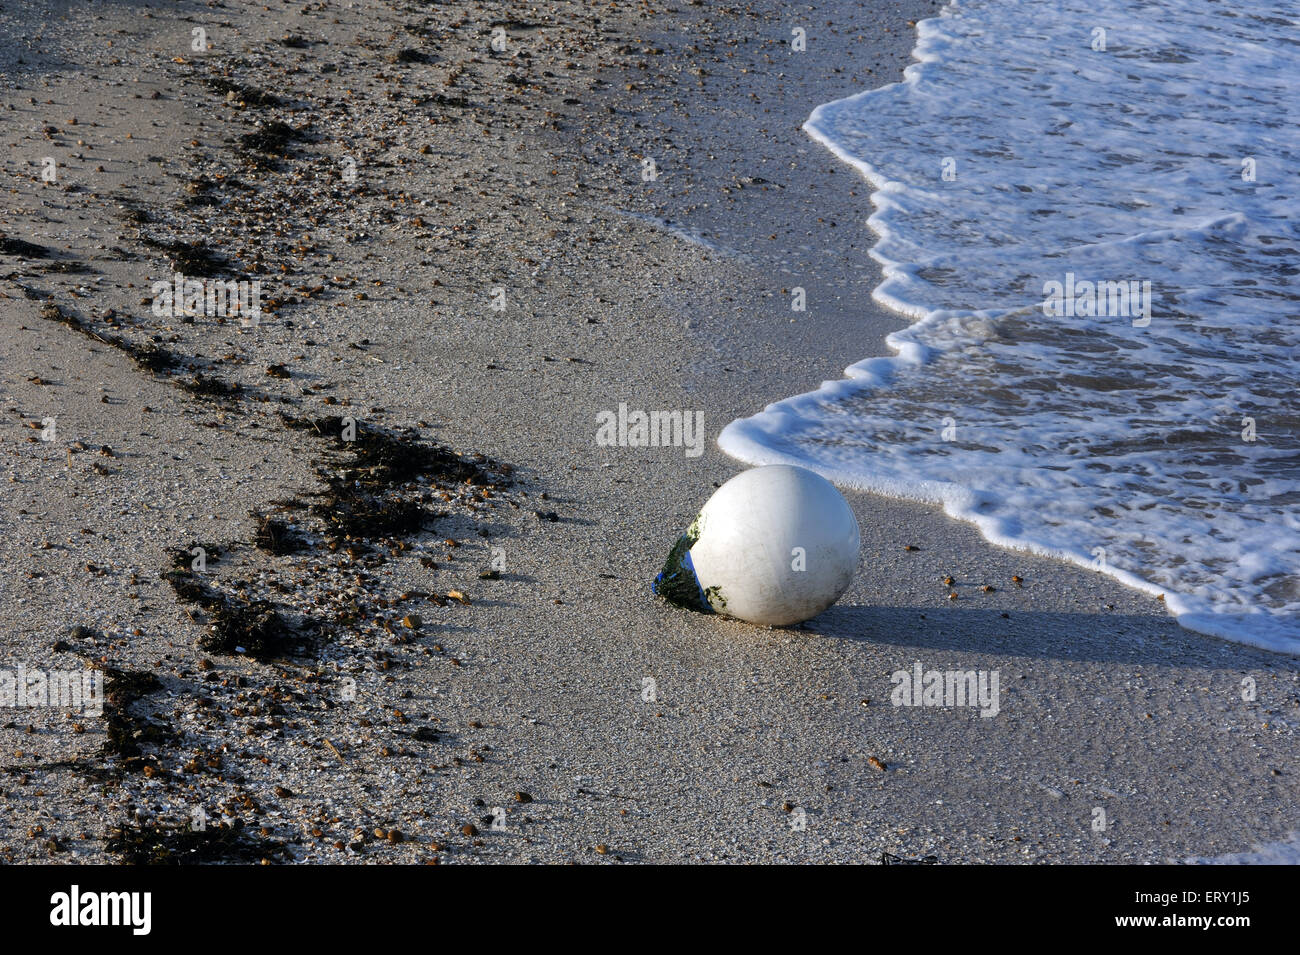 A white plastic buoy washes up on a sandy beach. Whitstable, Kent, UK Stock Photo